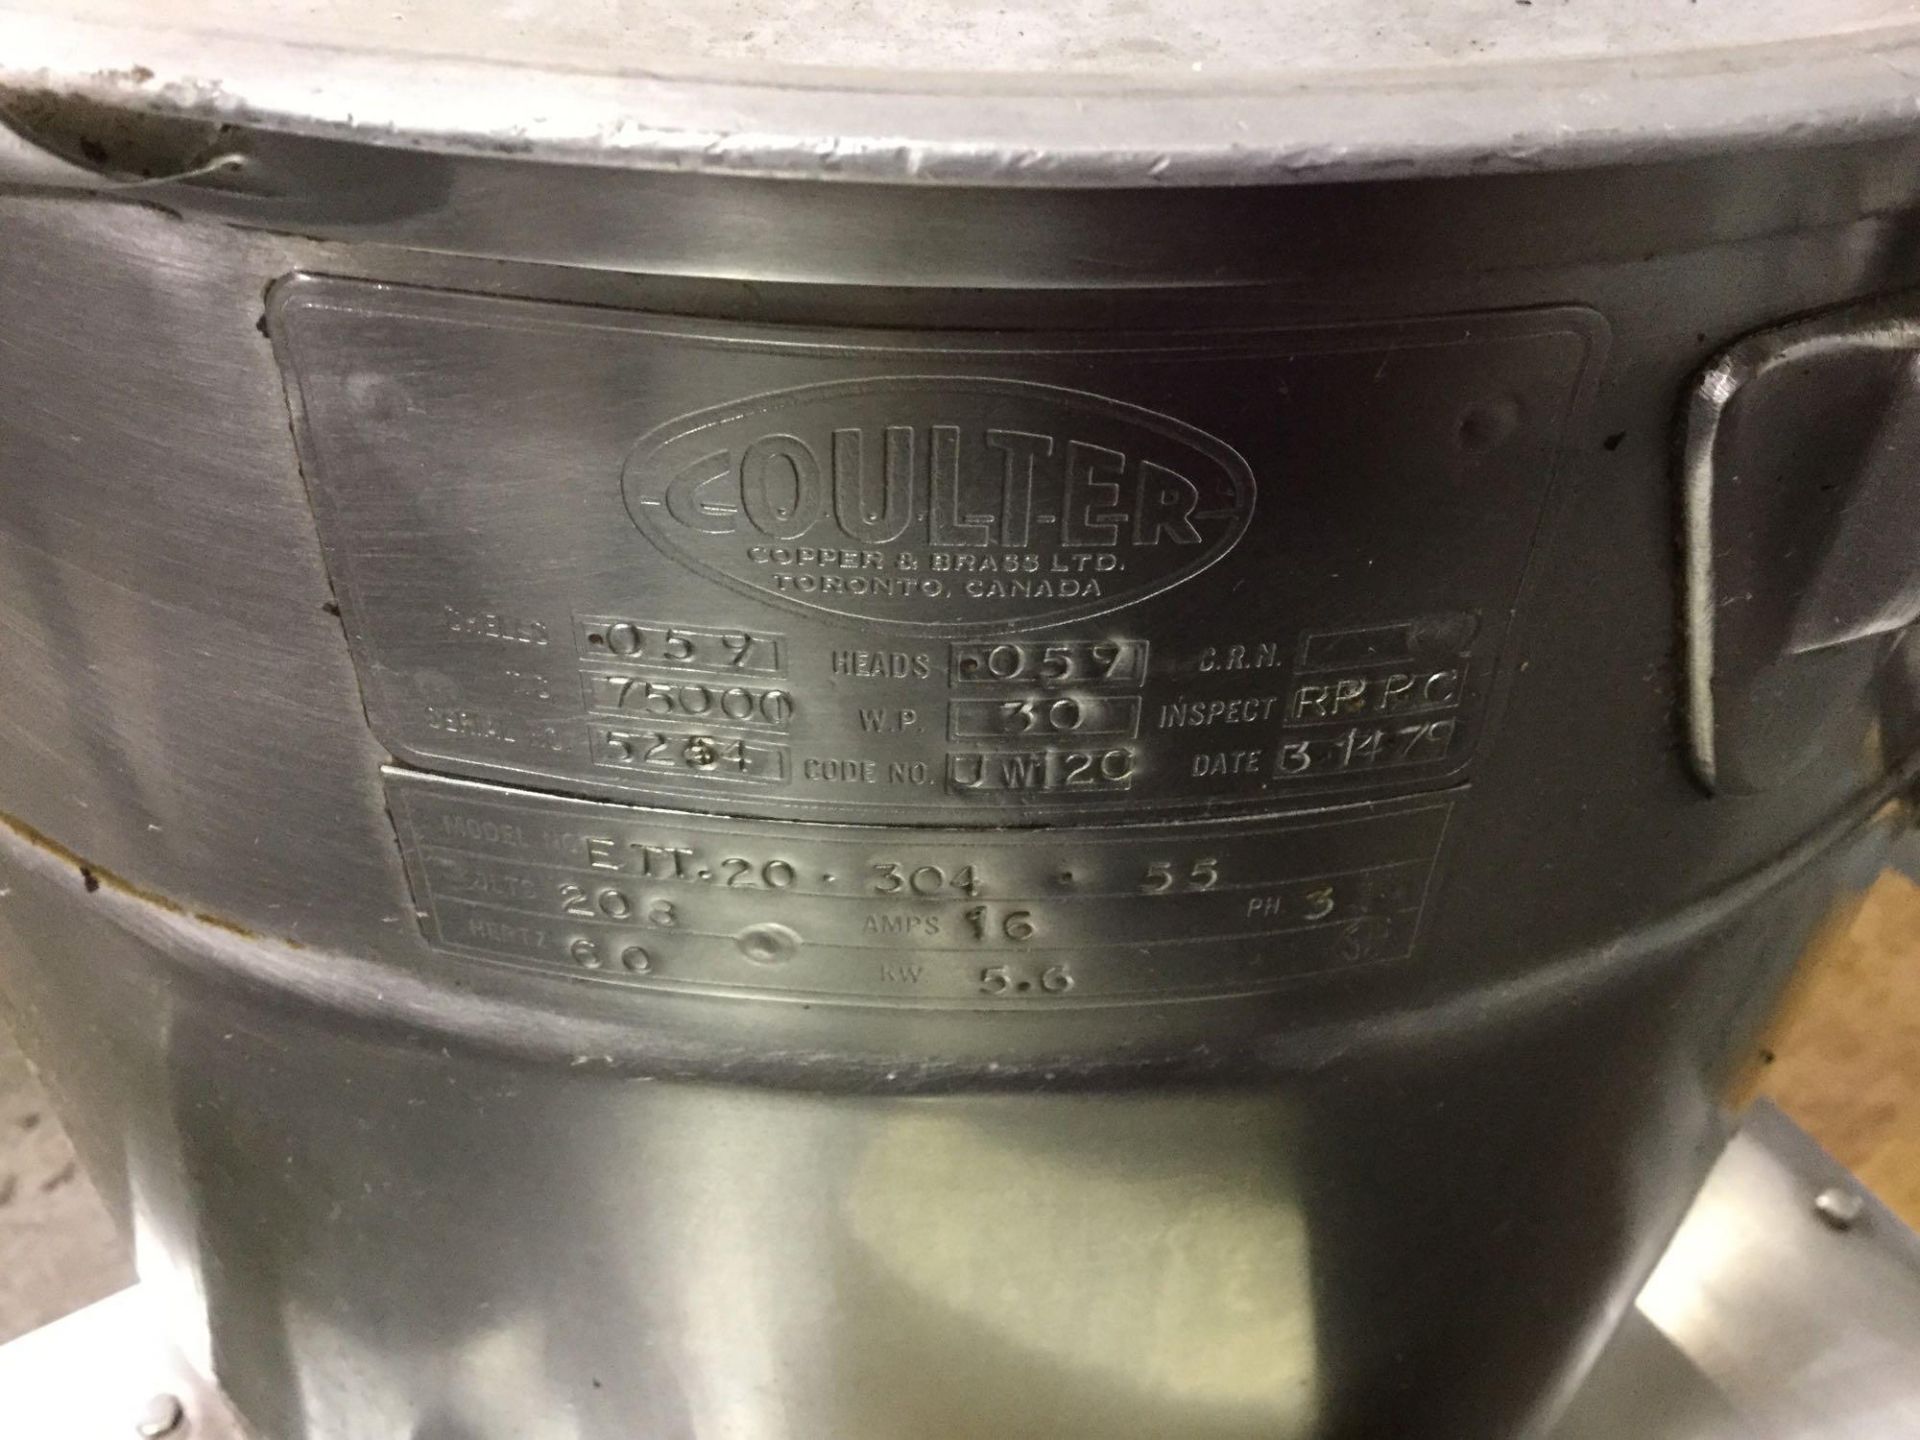 Coulter Steam Kettle With Stand and Sink - Model ETT.20. 304 - Image 3 of 3